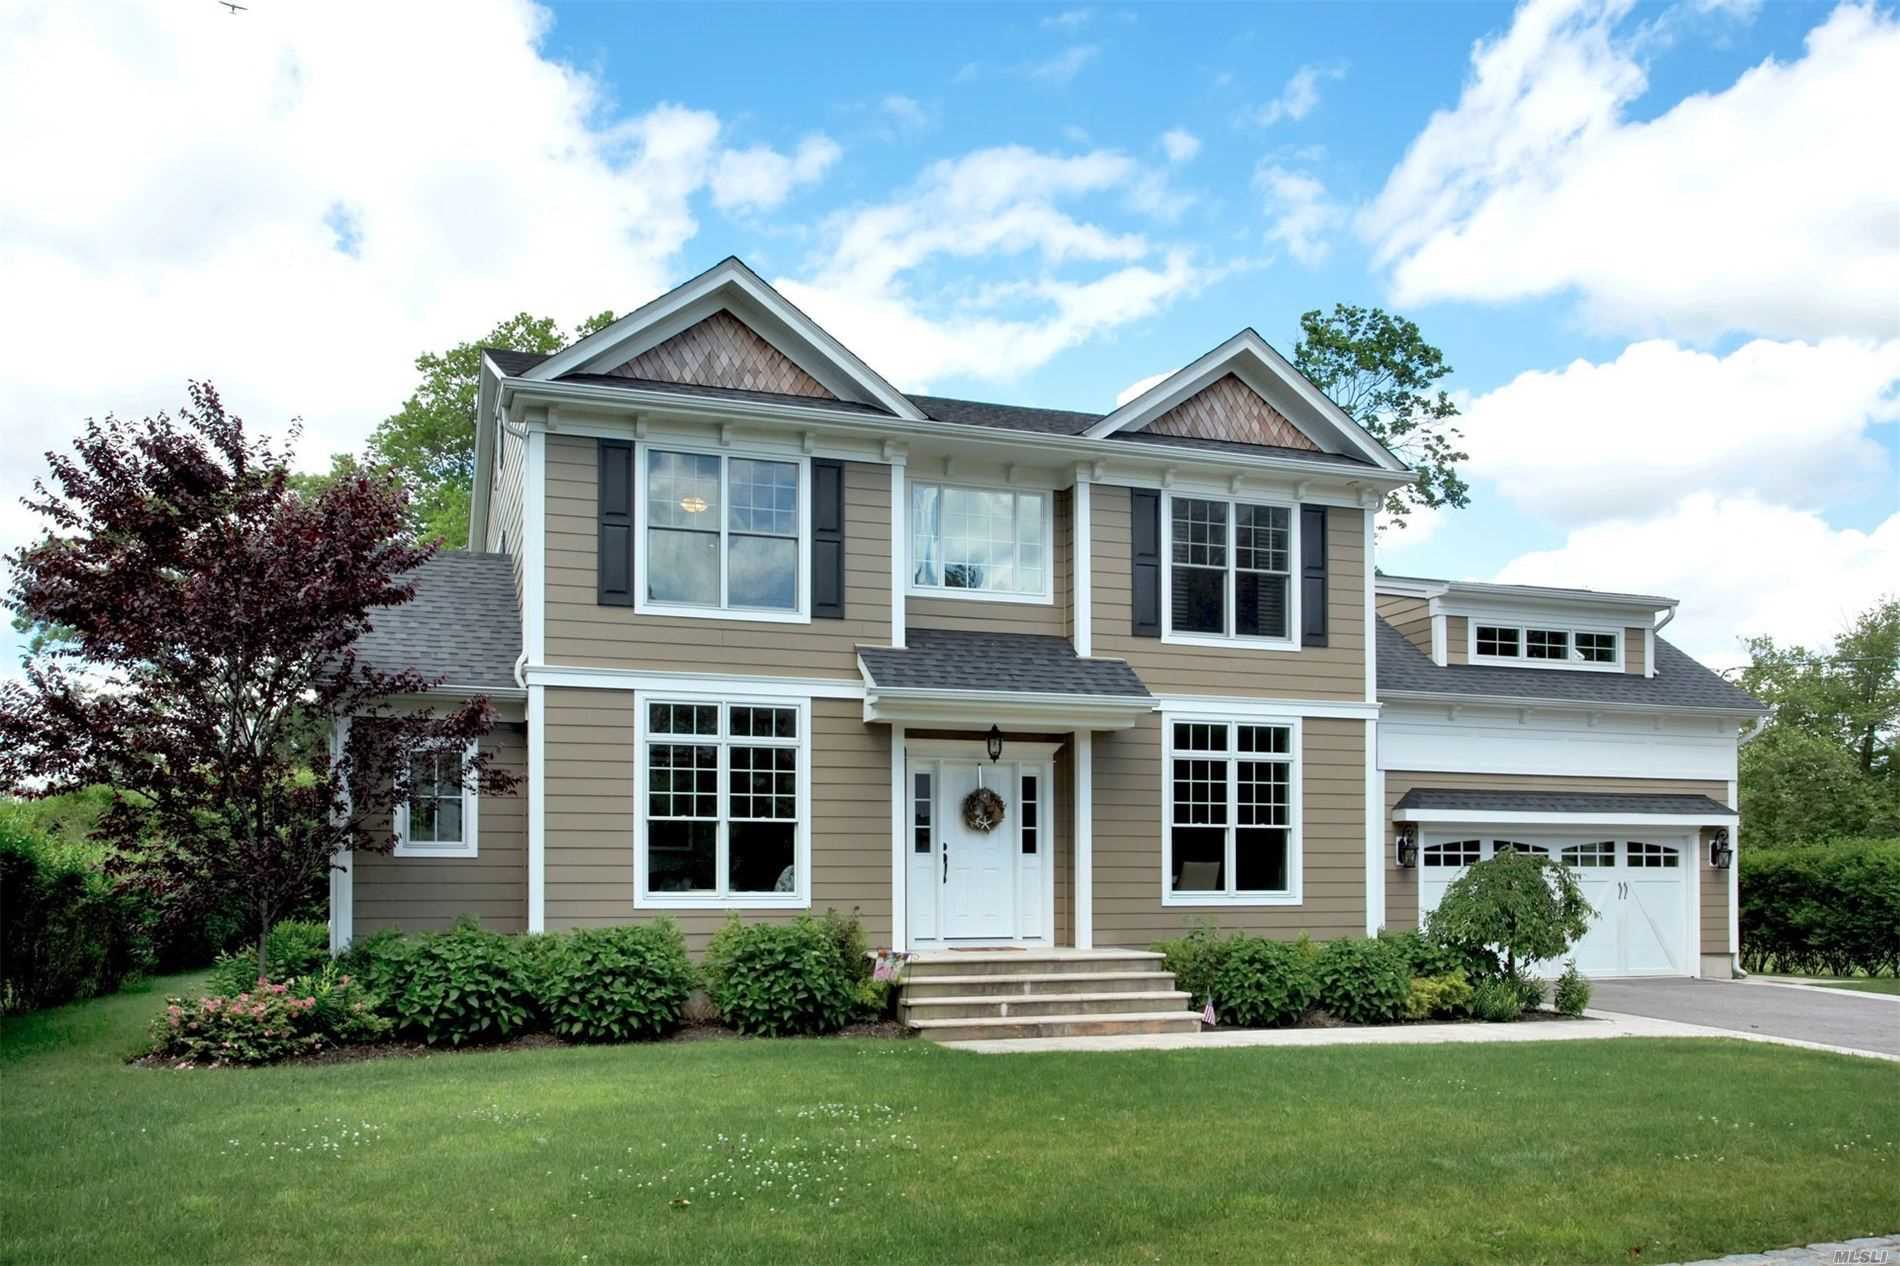 Stunning 3, 300 Sqft Colonial in the Argyle Section of Babylon Circa 2014... Entry Hall, Living Room, Den w/Gas Fireplace, Eat In Kitchen, Formal Dining, Master Bedroom w/Radiant Heat Full Bath, Walk-In Closet & Sitting Room, 3 Additional Bedrooms & Full Bath... All Oakwood Floors, Beautiful Trim & Moldings, Central Air, Full Basement with 9&rsquo; Ceilings, Limestone Patios & 2 Car Attached Garage... You Won&rsquo;t Want to Miss This One!